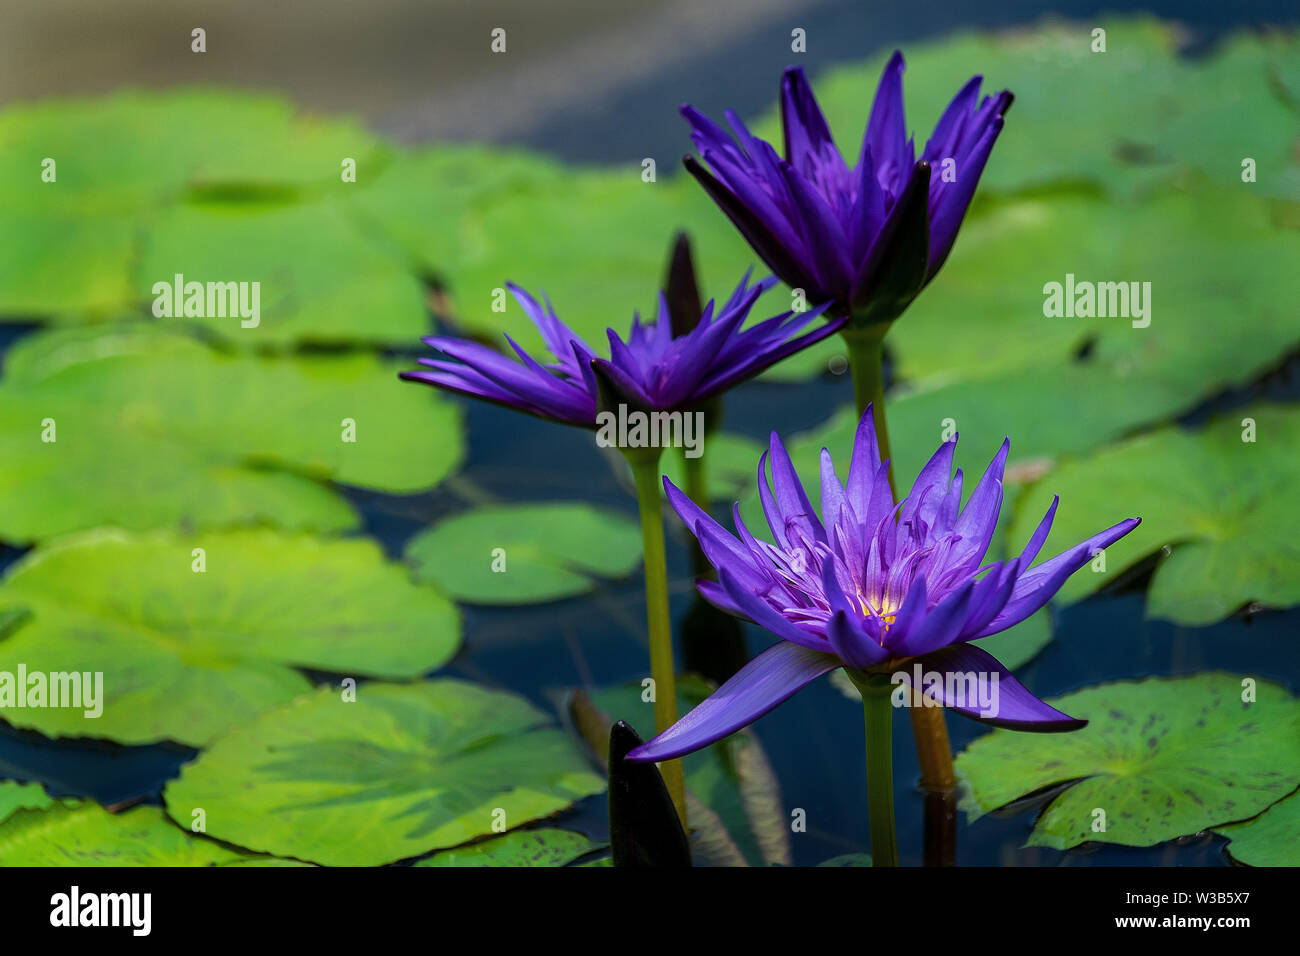 Beautiful purple lily flowers in full bloom surrounded by the lily pad leaves Stock Photo